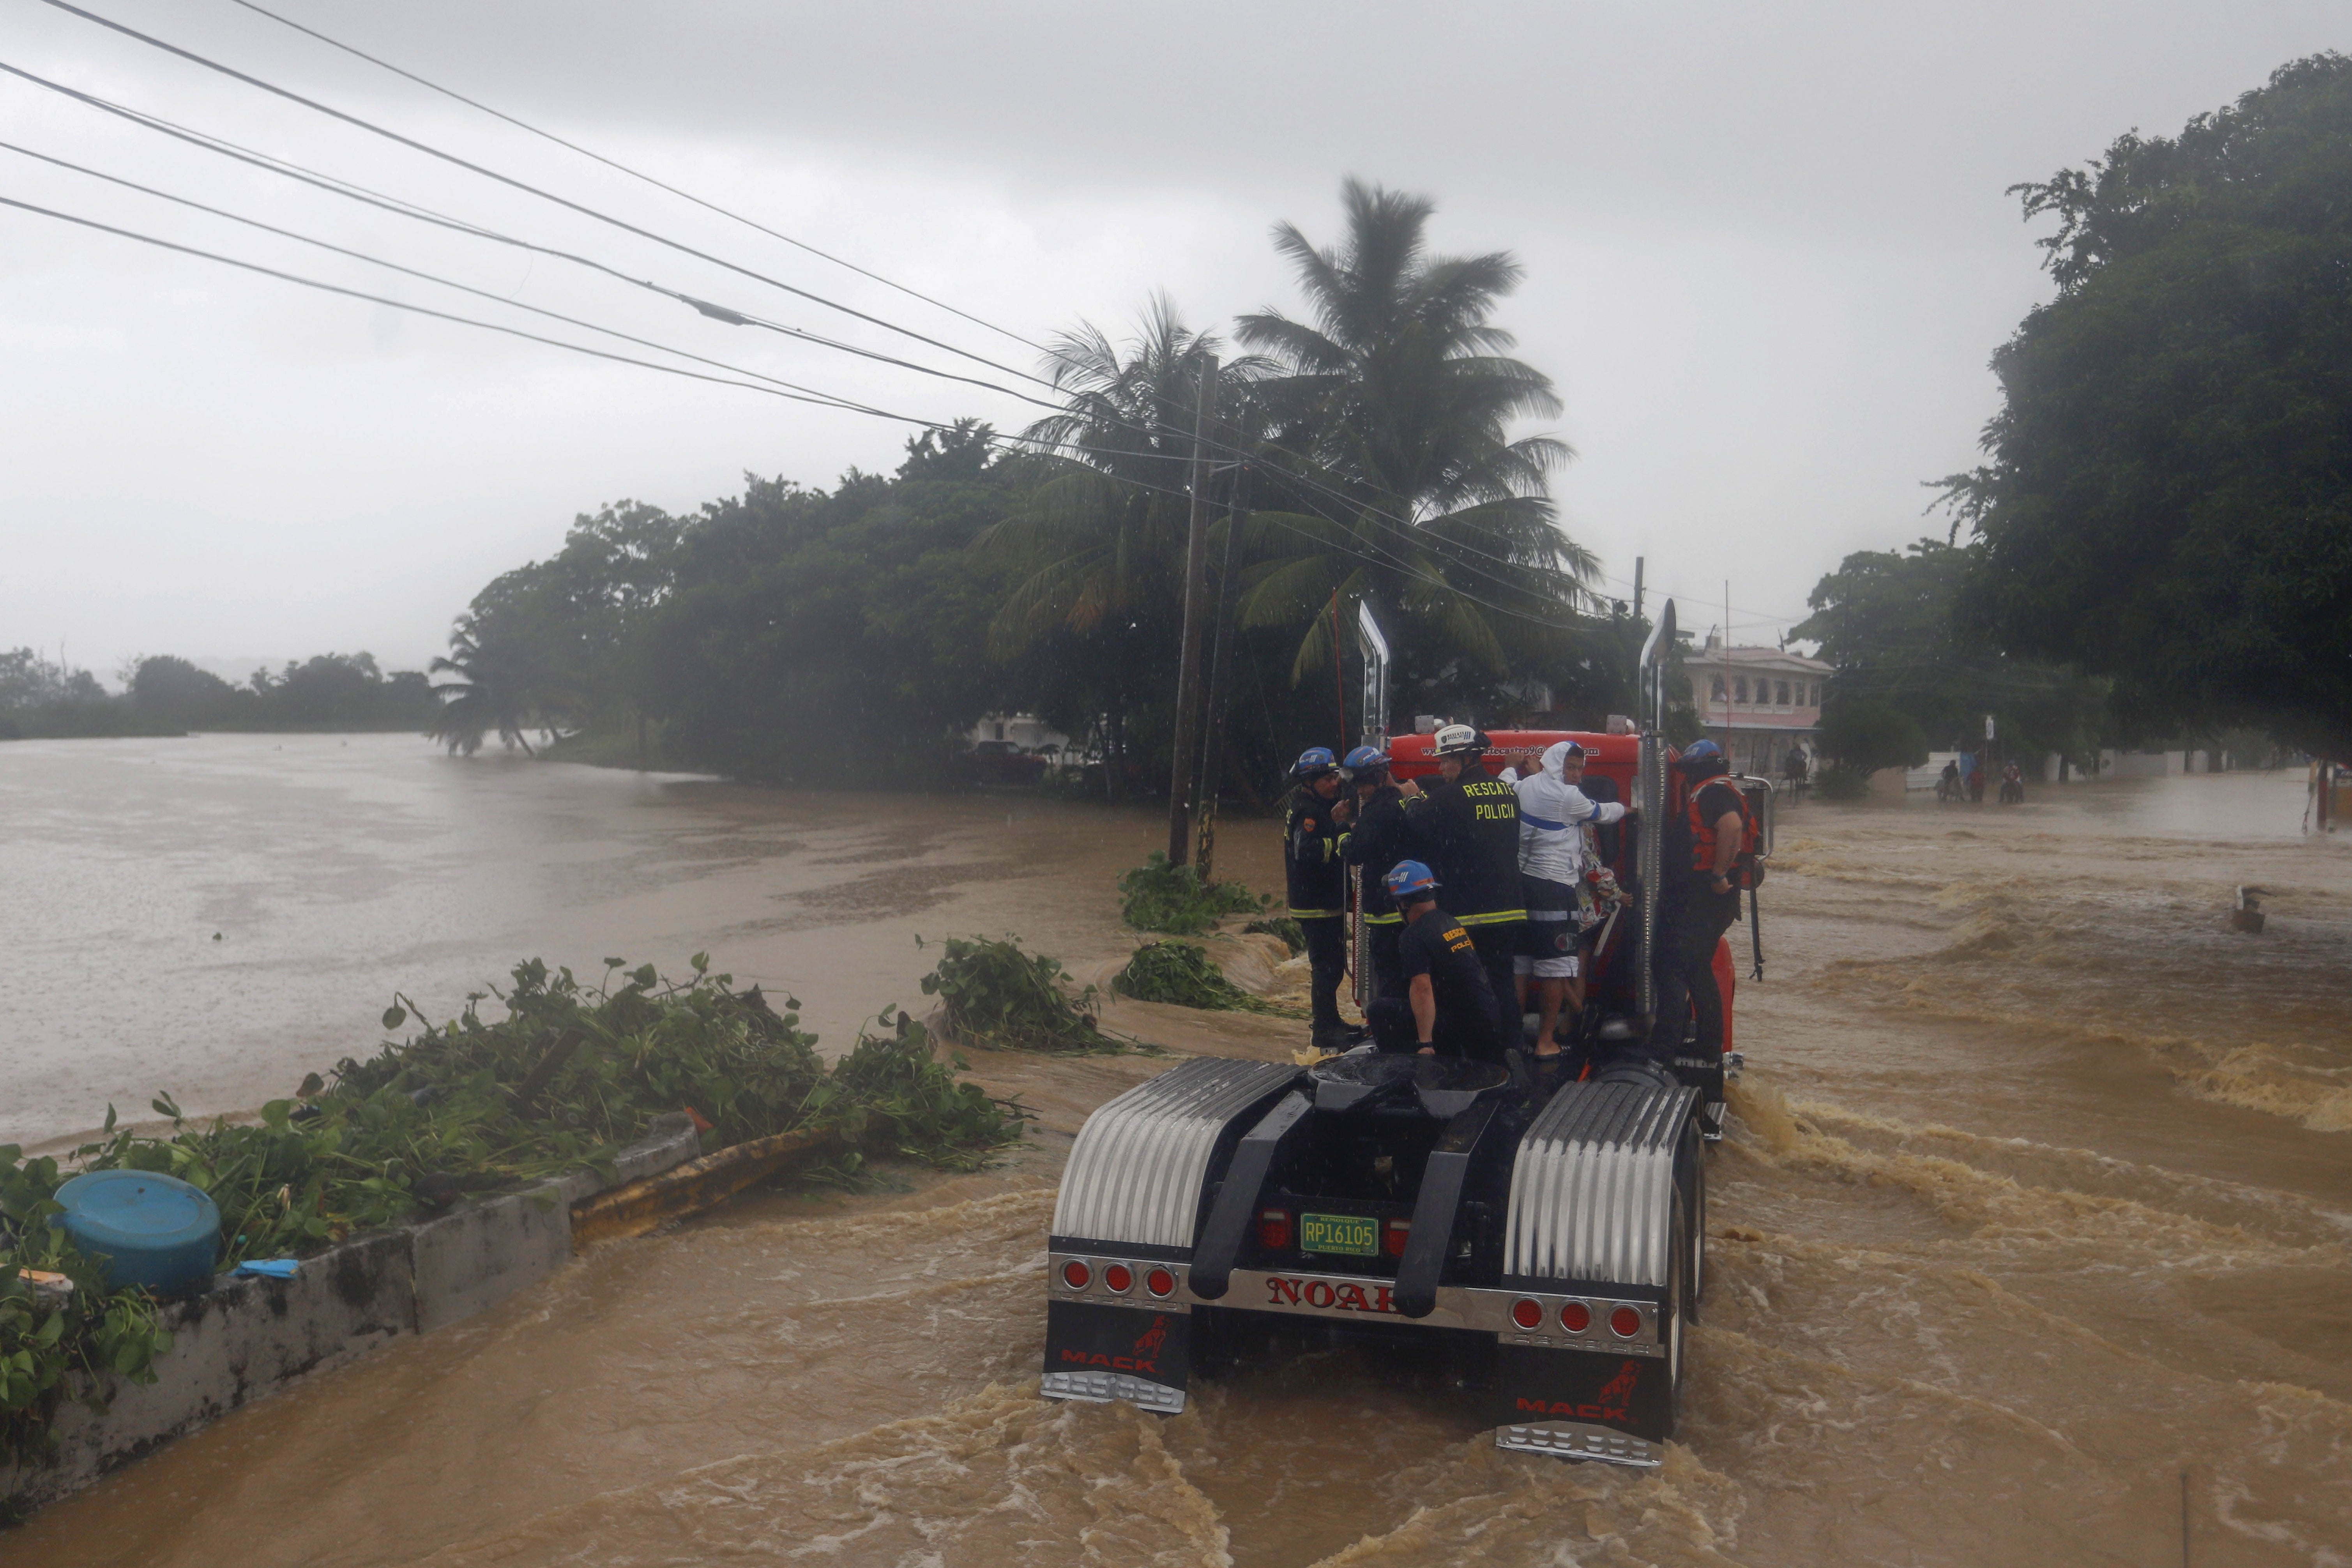 Members of the Rescue Police drive in a flooded street after the passage of hurricane Fiona, in Toa Baja, Puerto Rico, 19 September 2022.